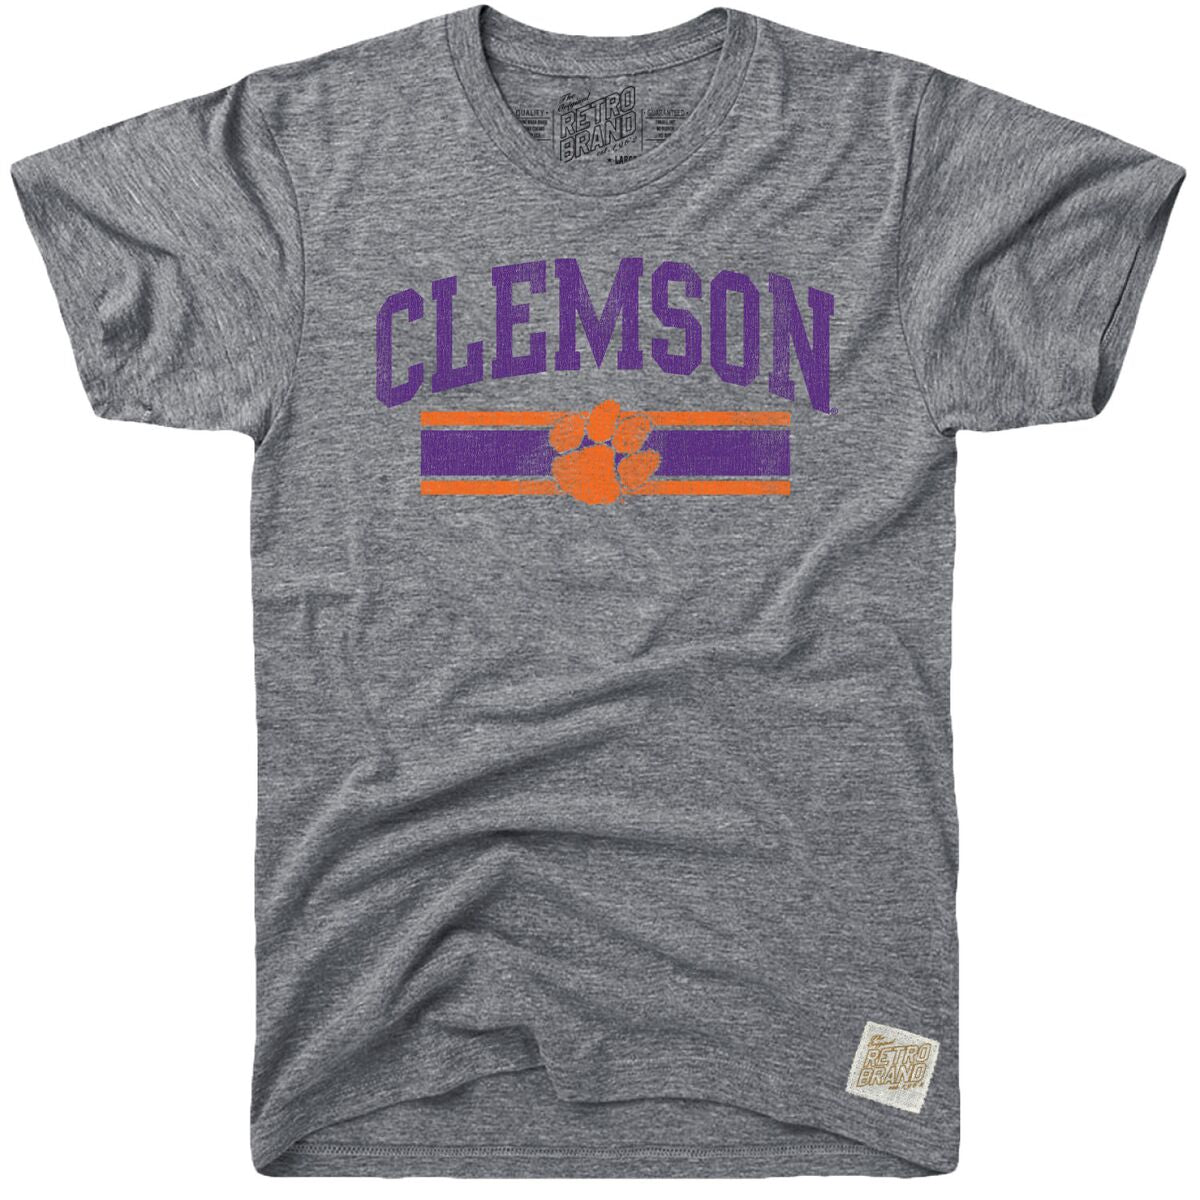 Clemson arch in purple with orange tiger paw on purple stripe below on our tri-blend unisex tee in streaky gray